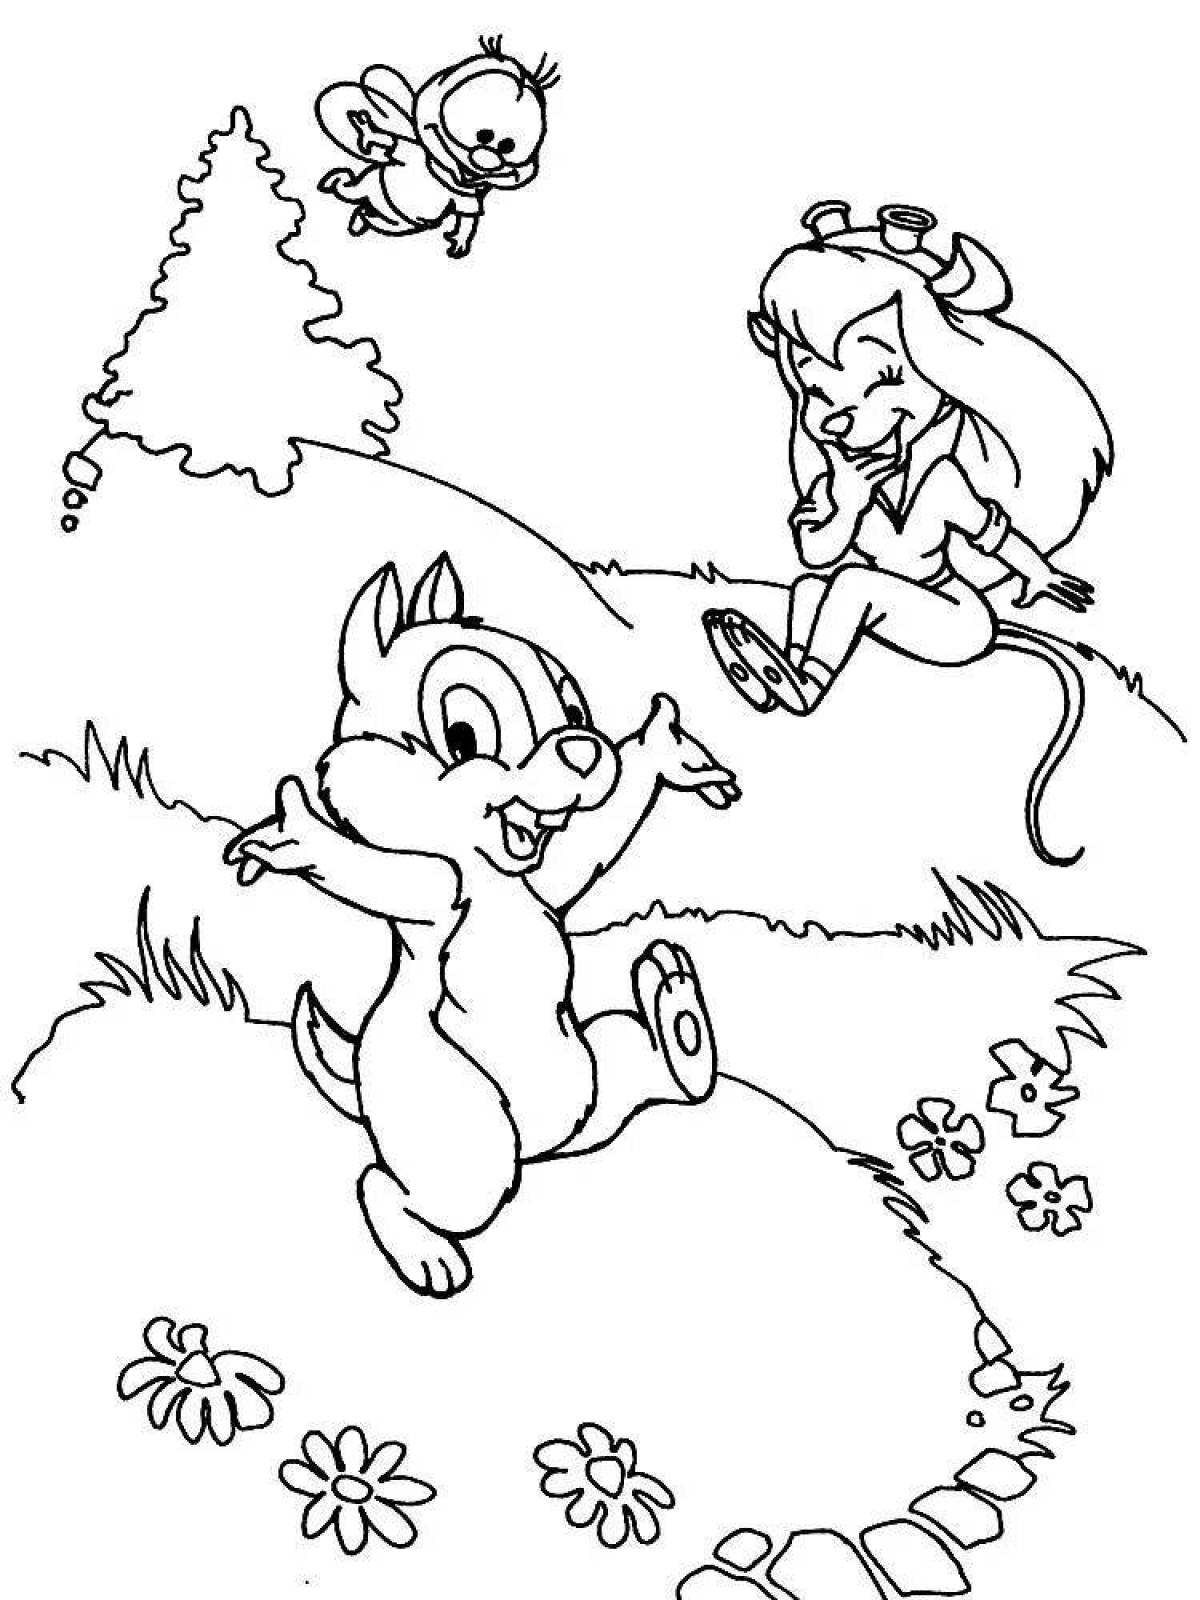 Charming chip and dale coloring book